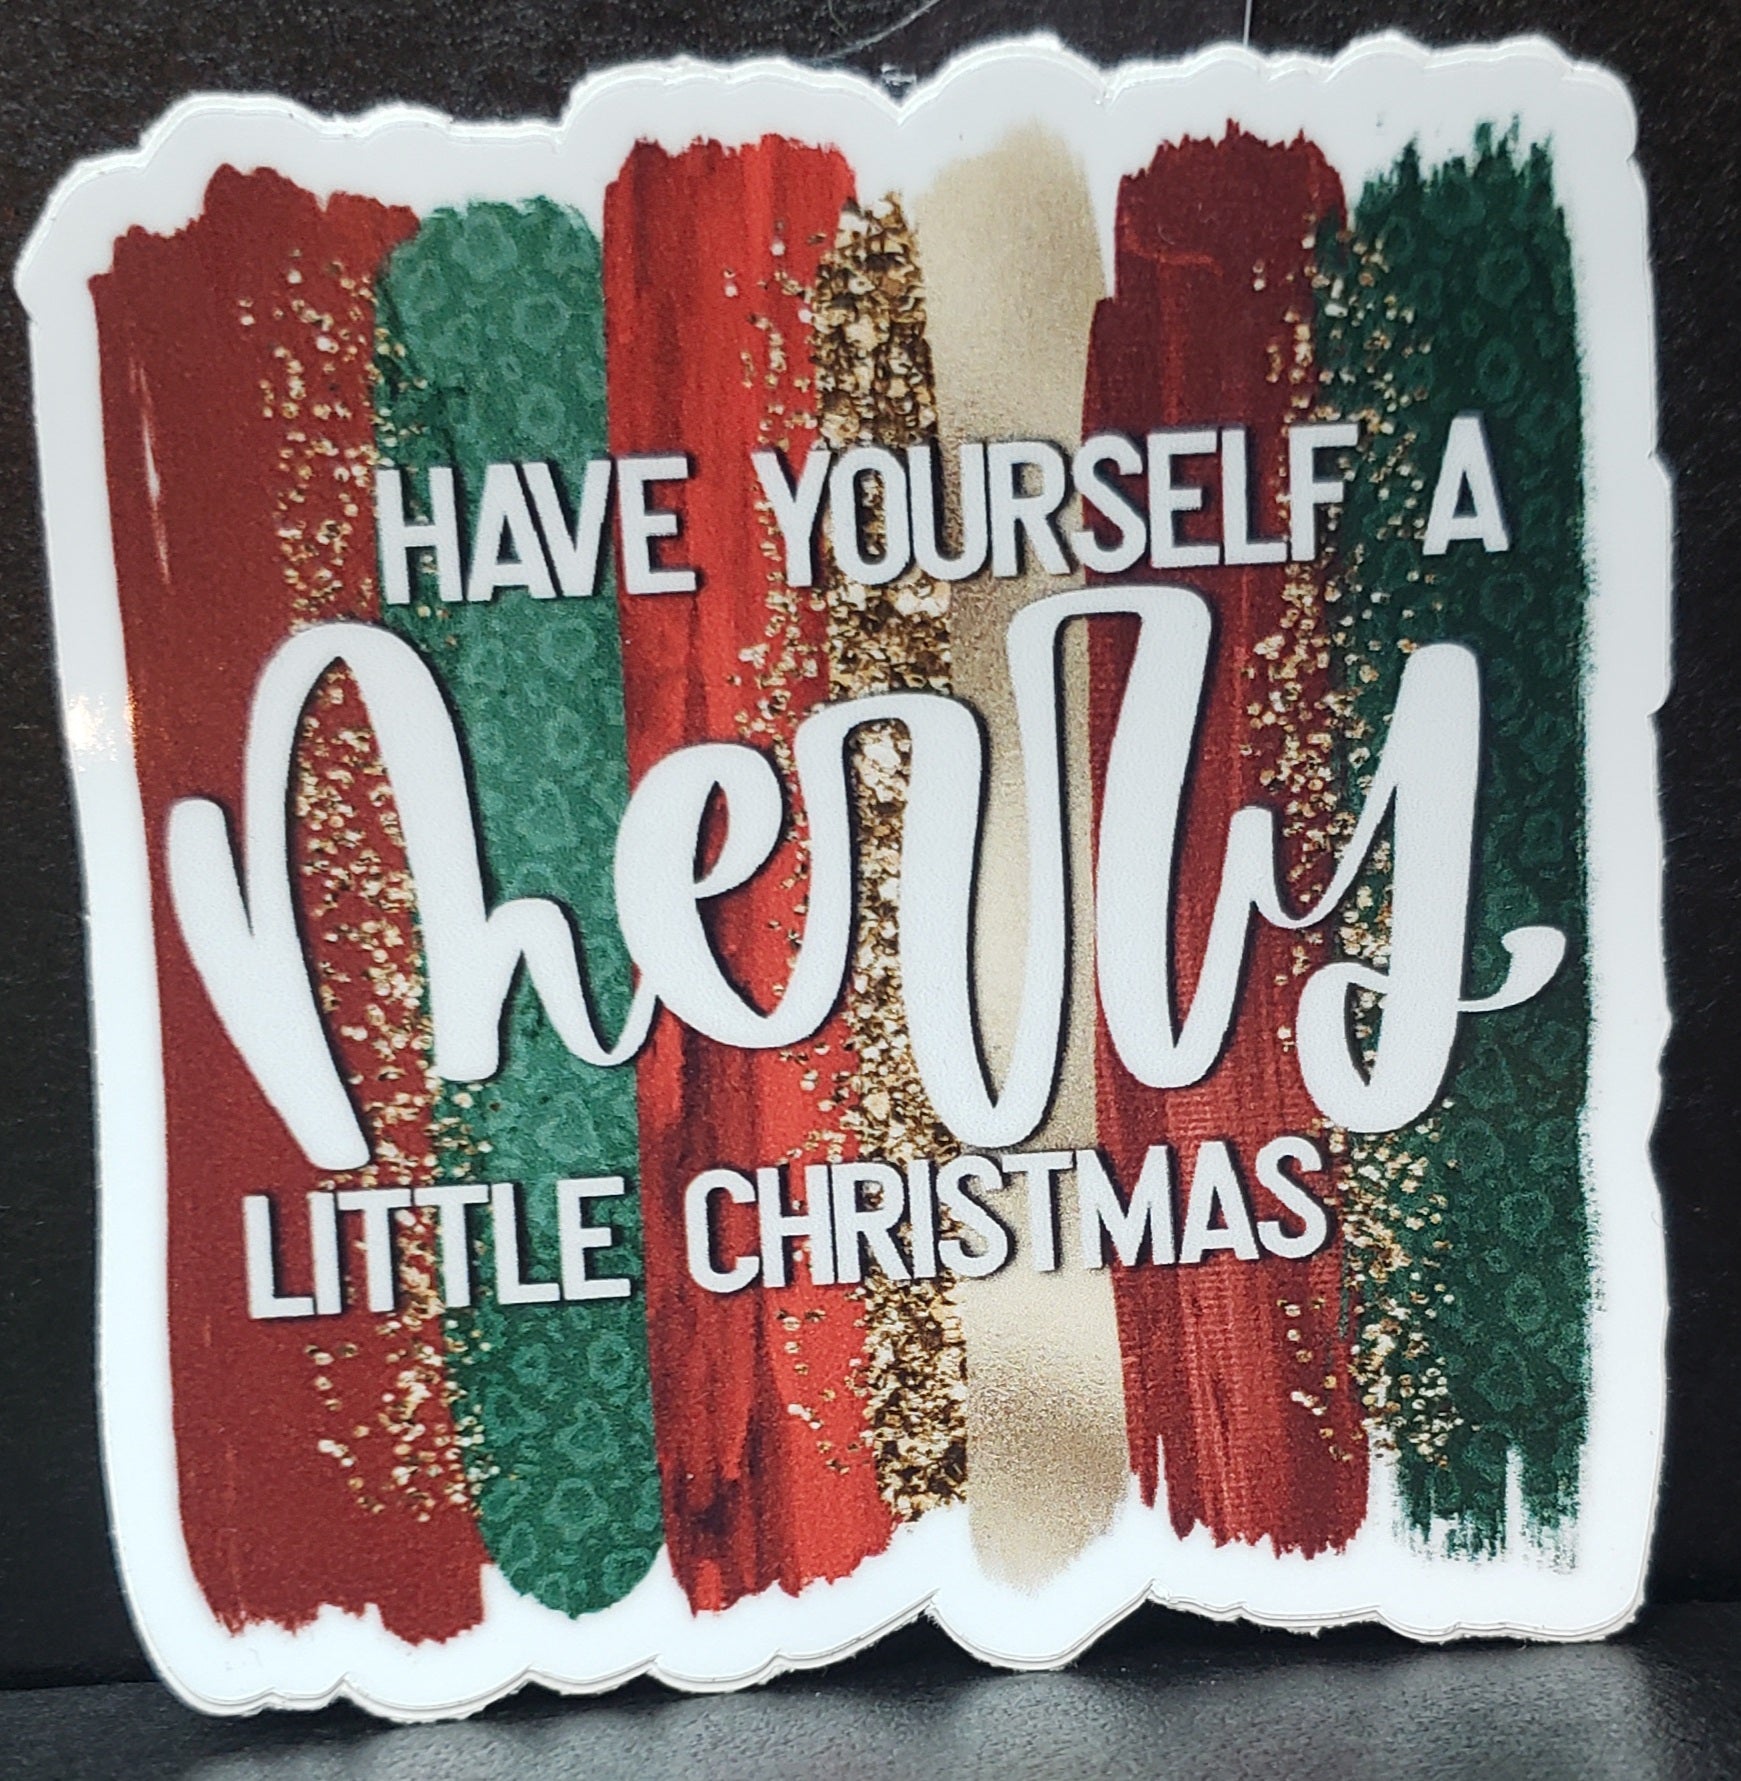 Have Yourself A Merry Little Christmas - Vinyl Sticker Decal